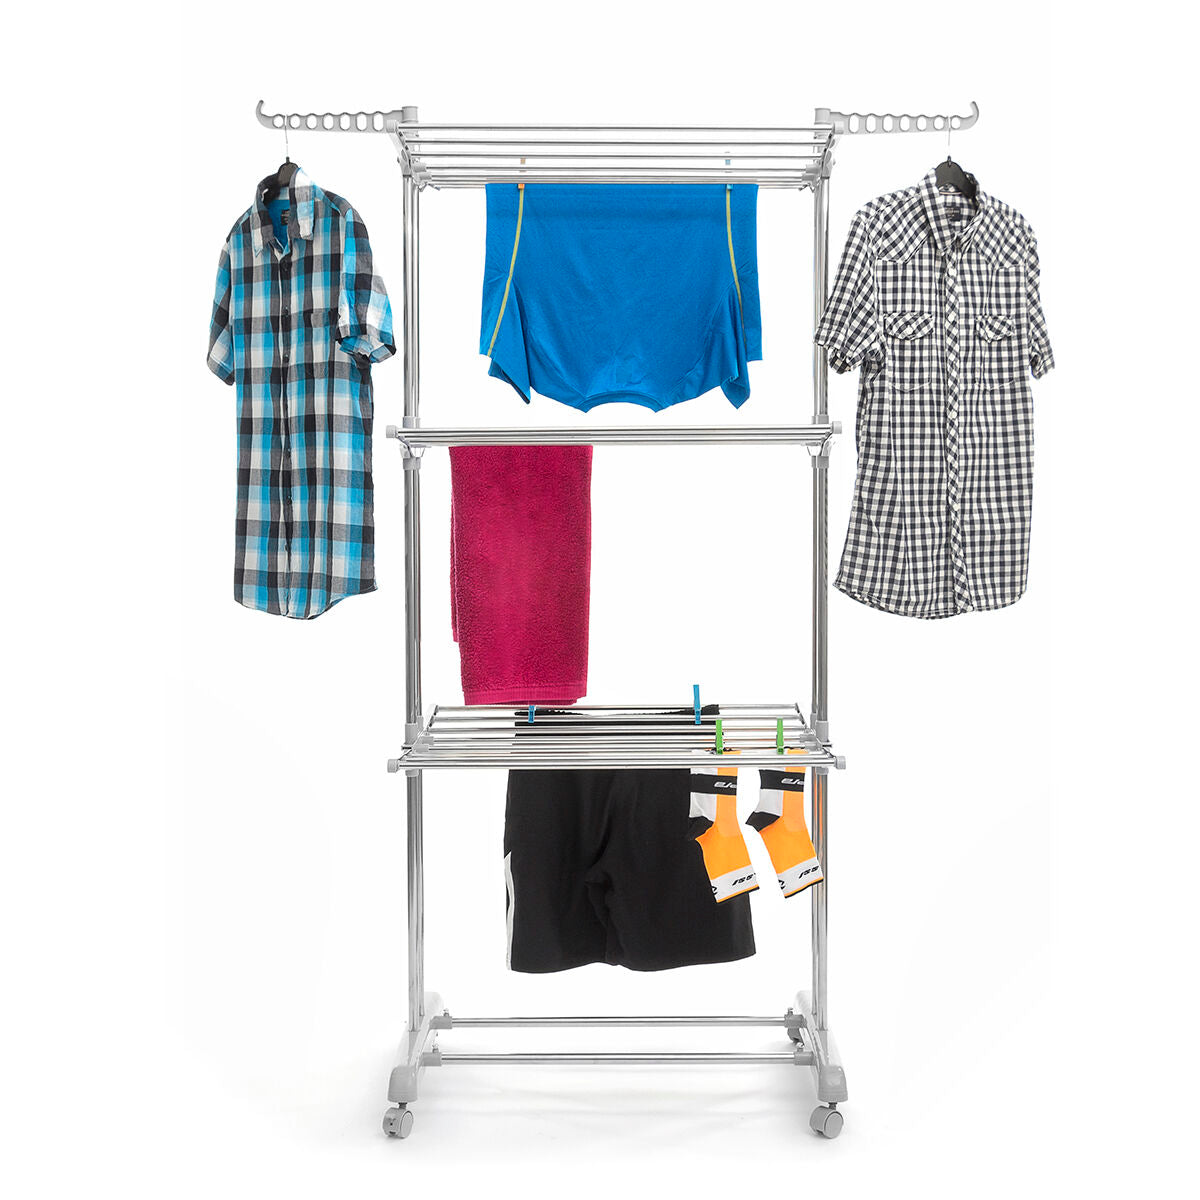 Folding Vertical Clothes Dryer with Wheels Folver InnovaGoods 24 Bars